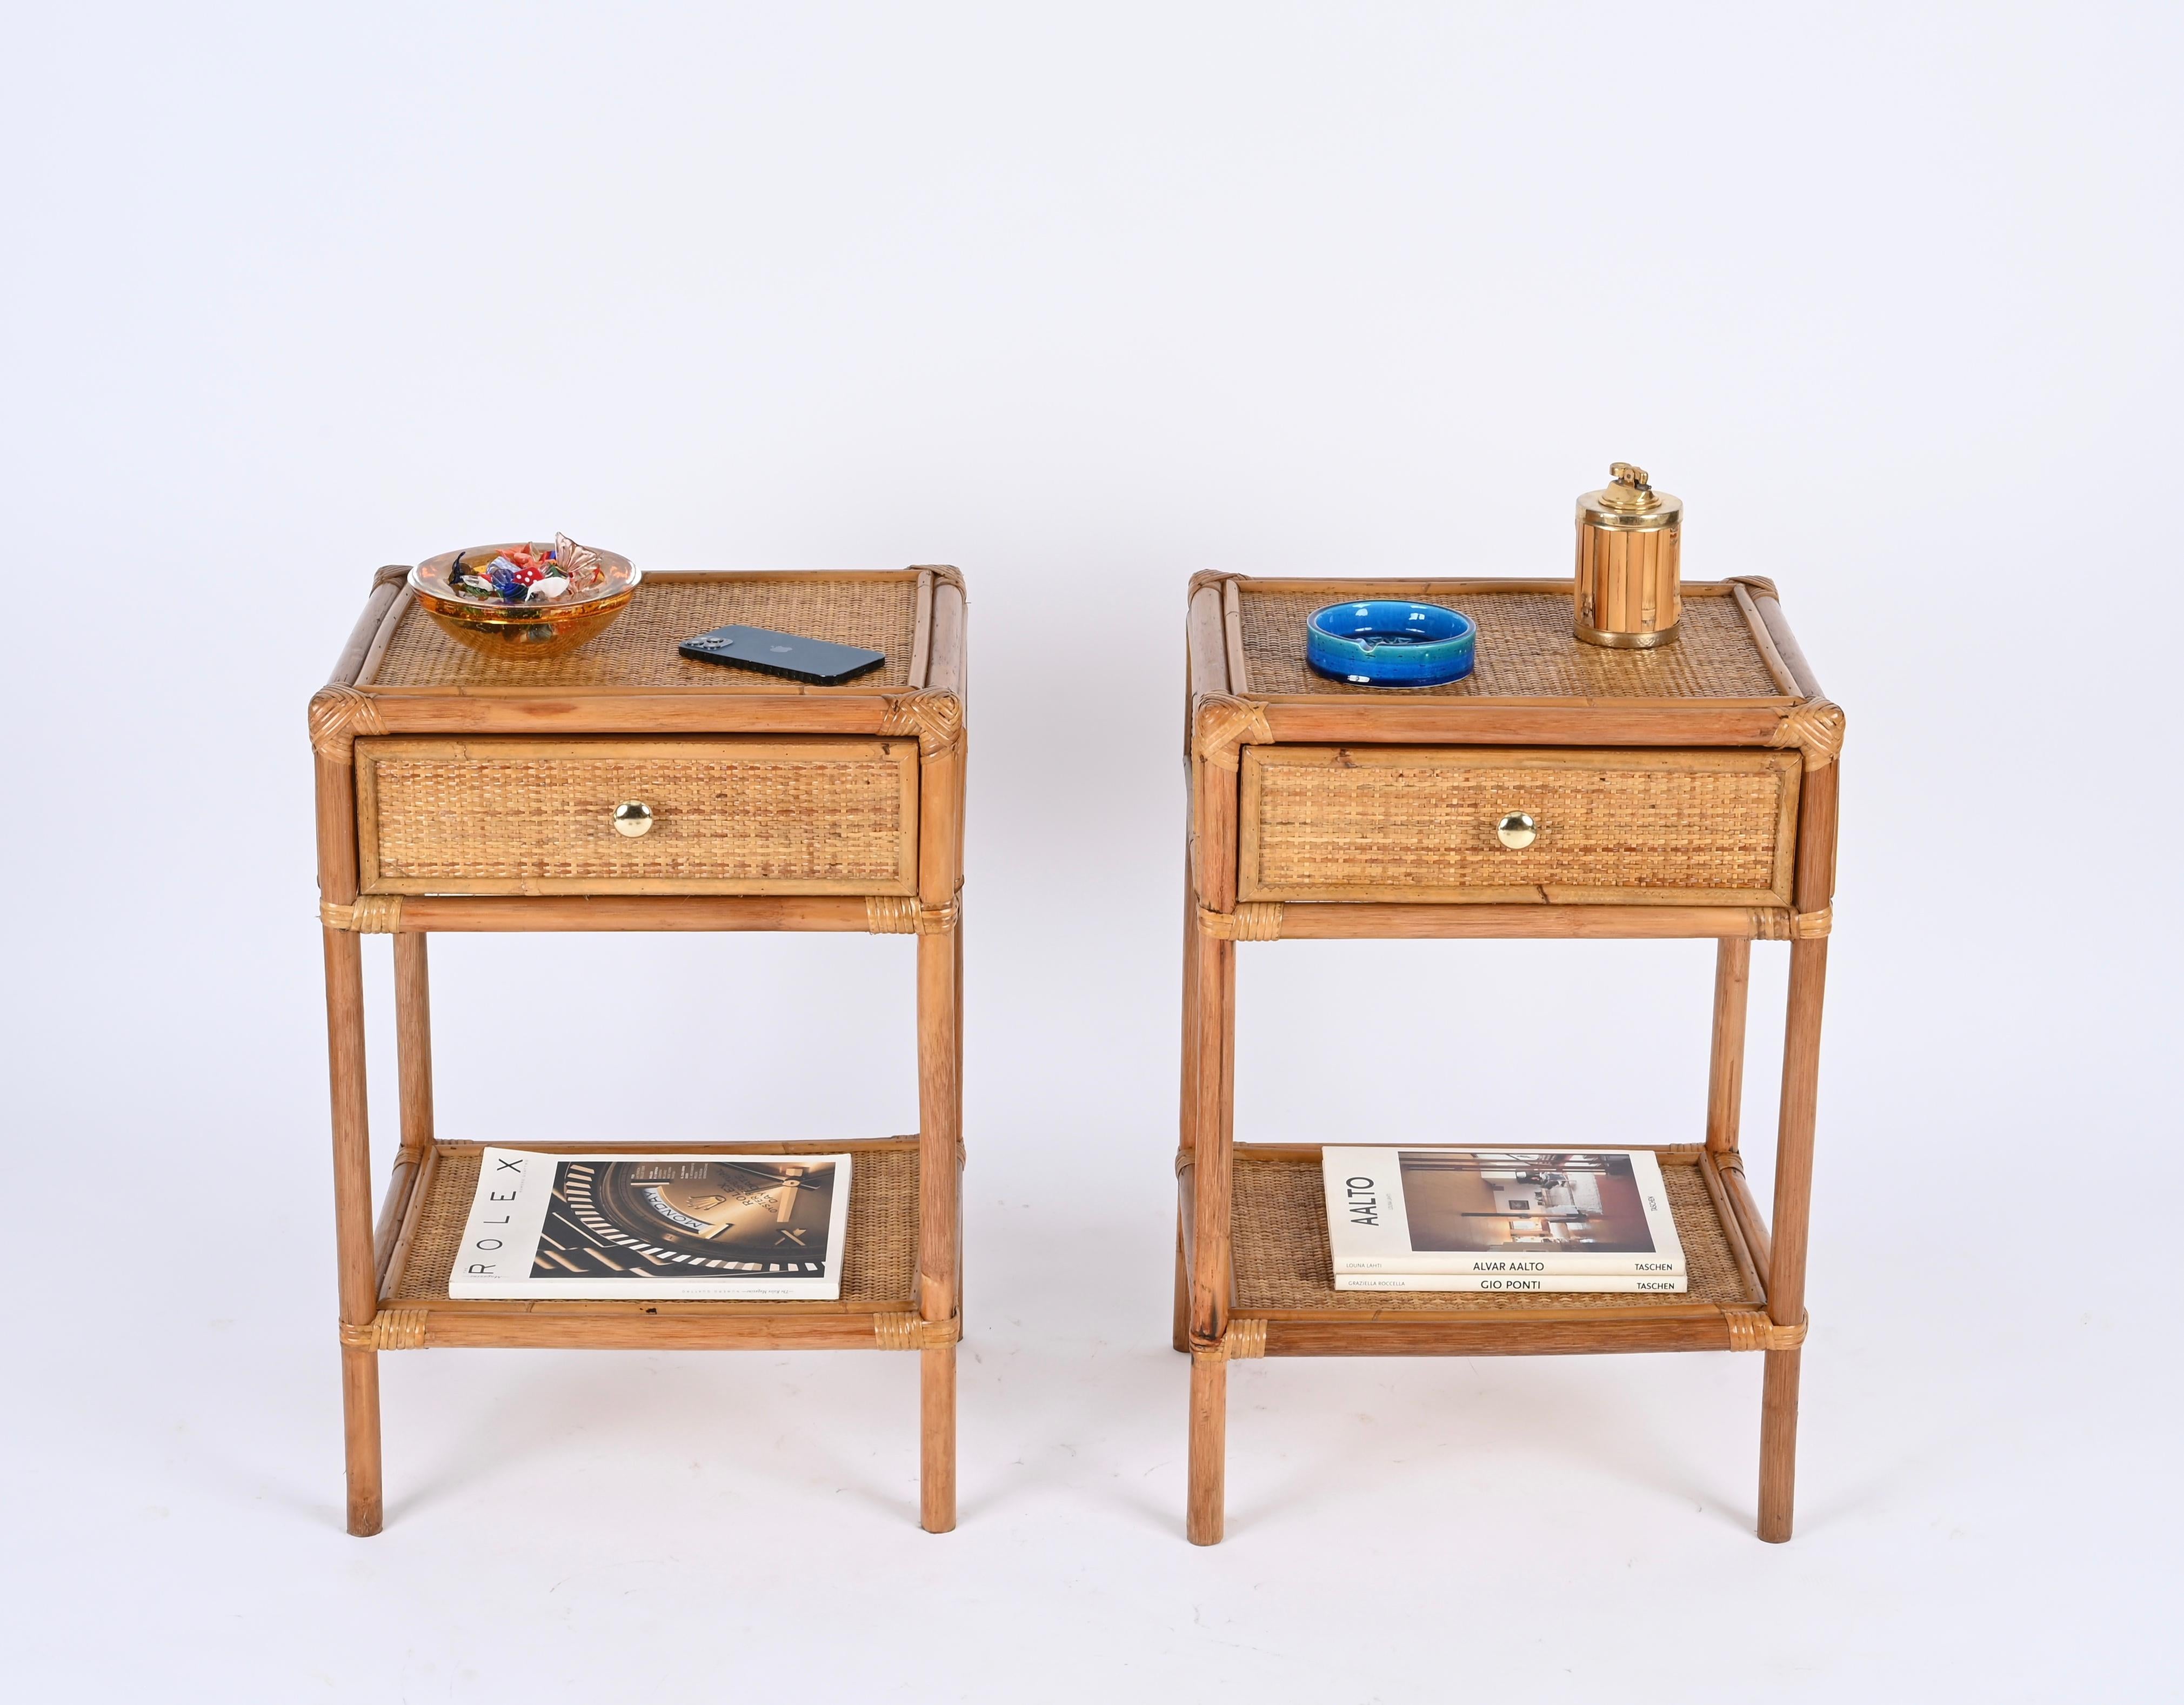 Delightful pair of Mid-Century nightstands in bamboo and hand-woven rattan wicker with brass handles. These lovely bedside tables were designed in Italy during the 1970s.

These stunning nightstands are fully made in bamboo canes and enriched all